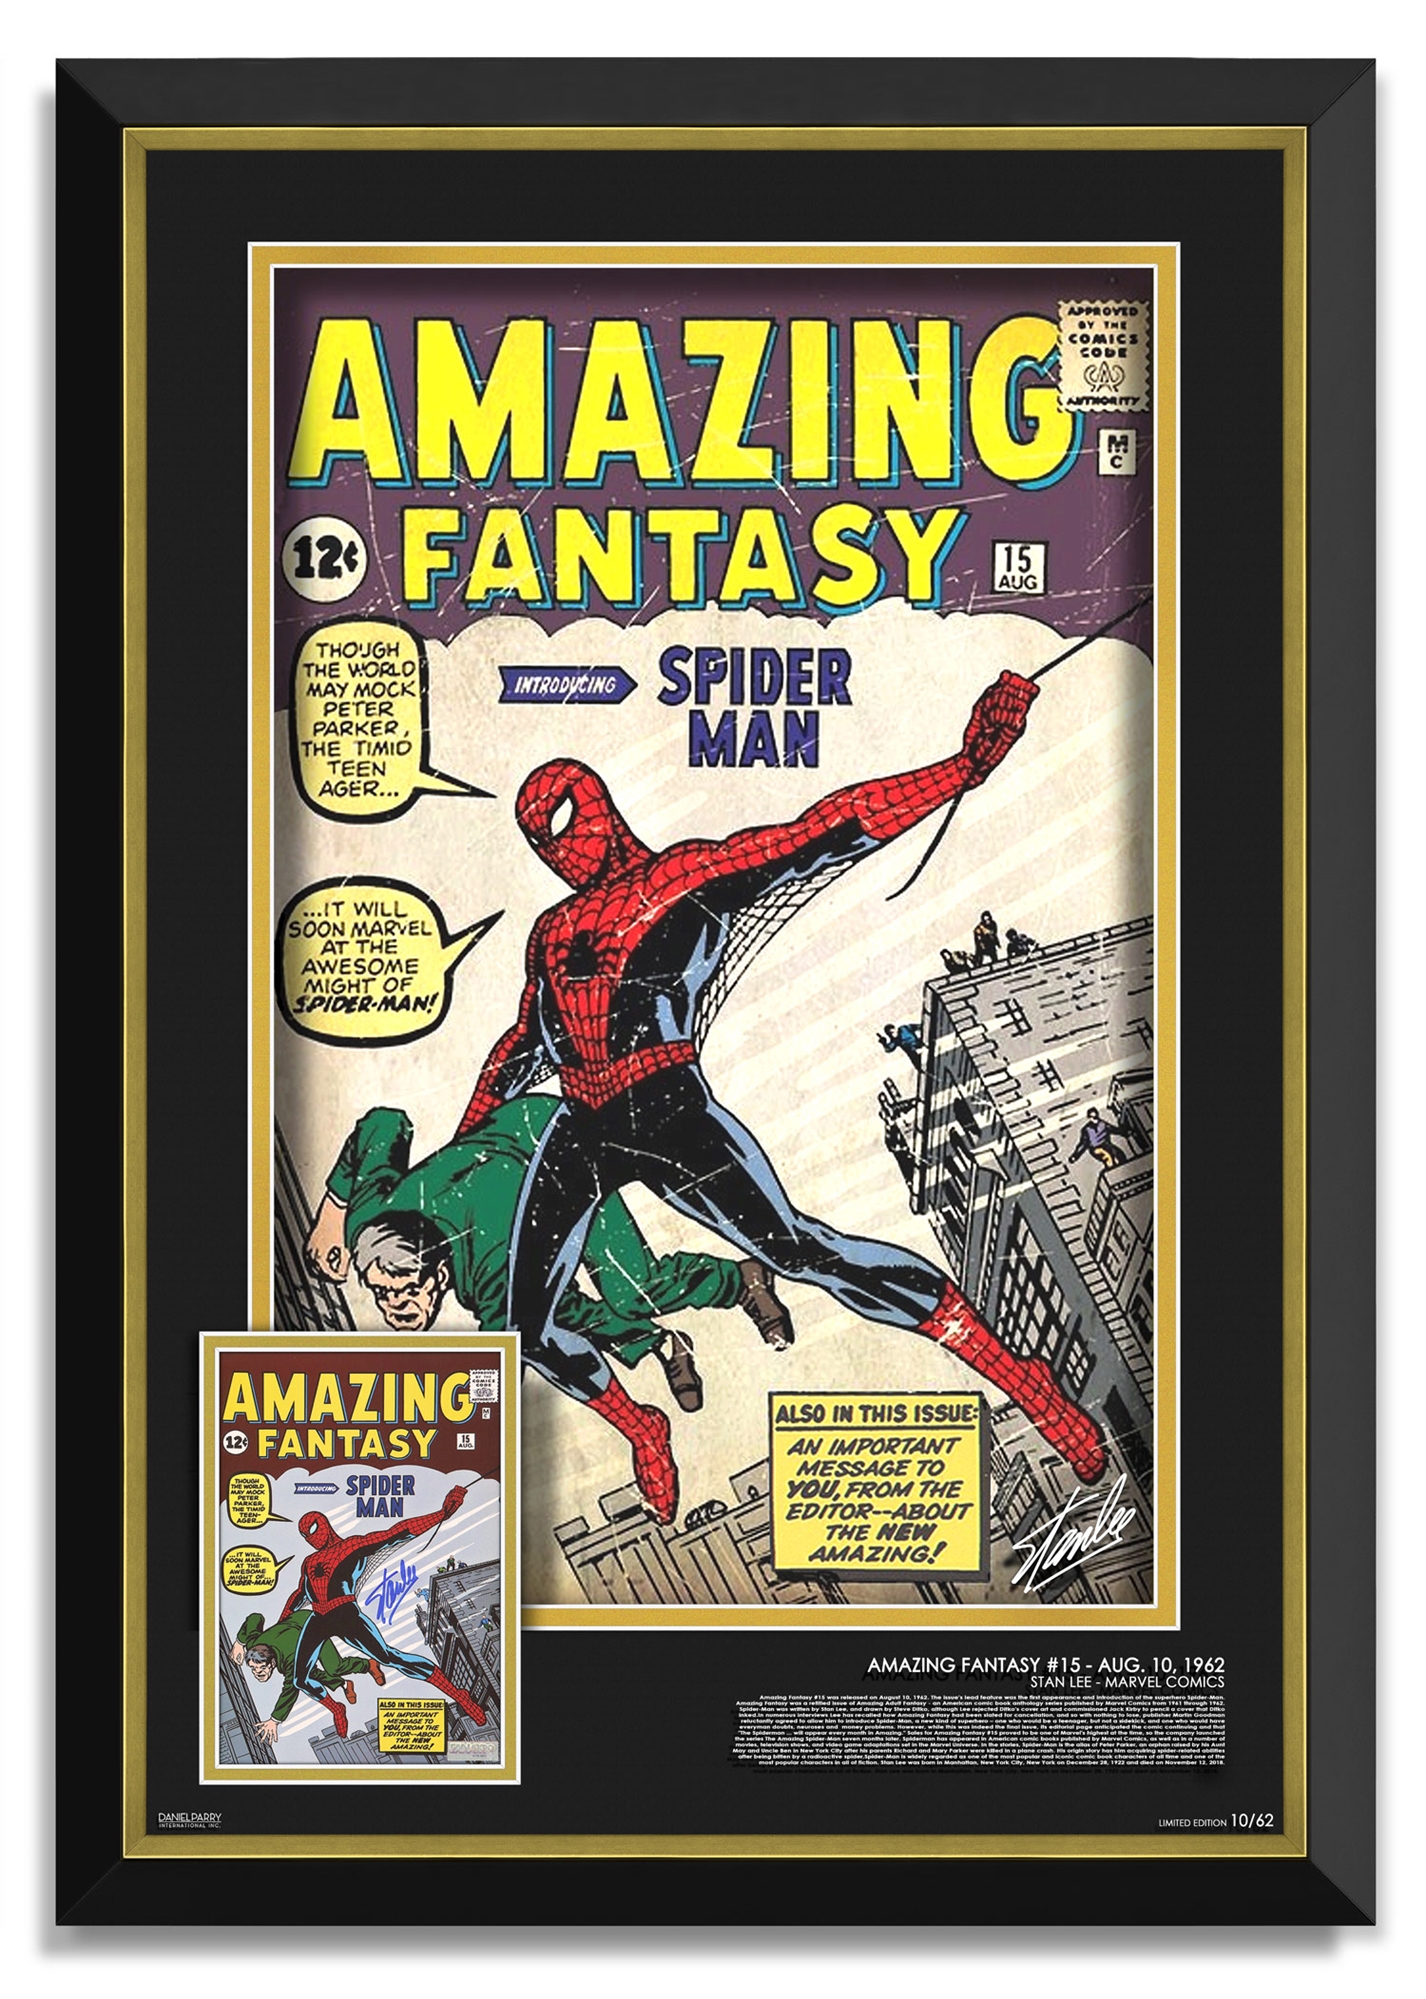 Stan Lee Signed Amazing Fantasy #15 Spider-Man Comic Cover 40x32 Display Frame